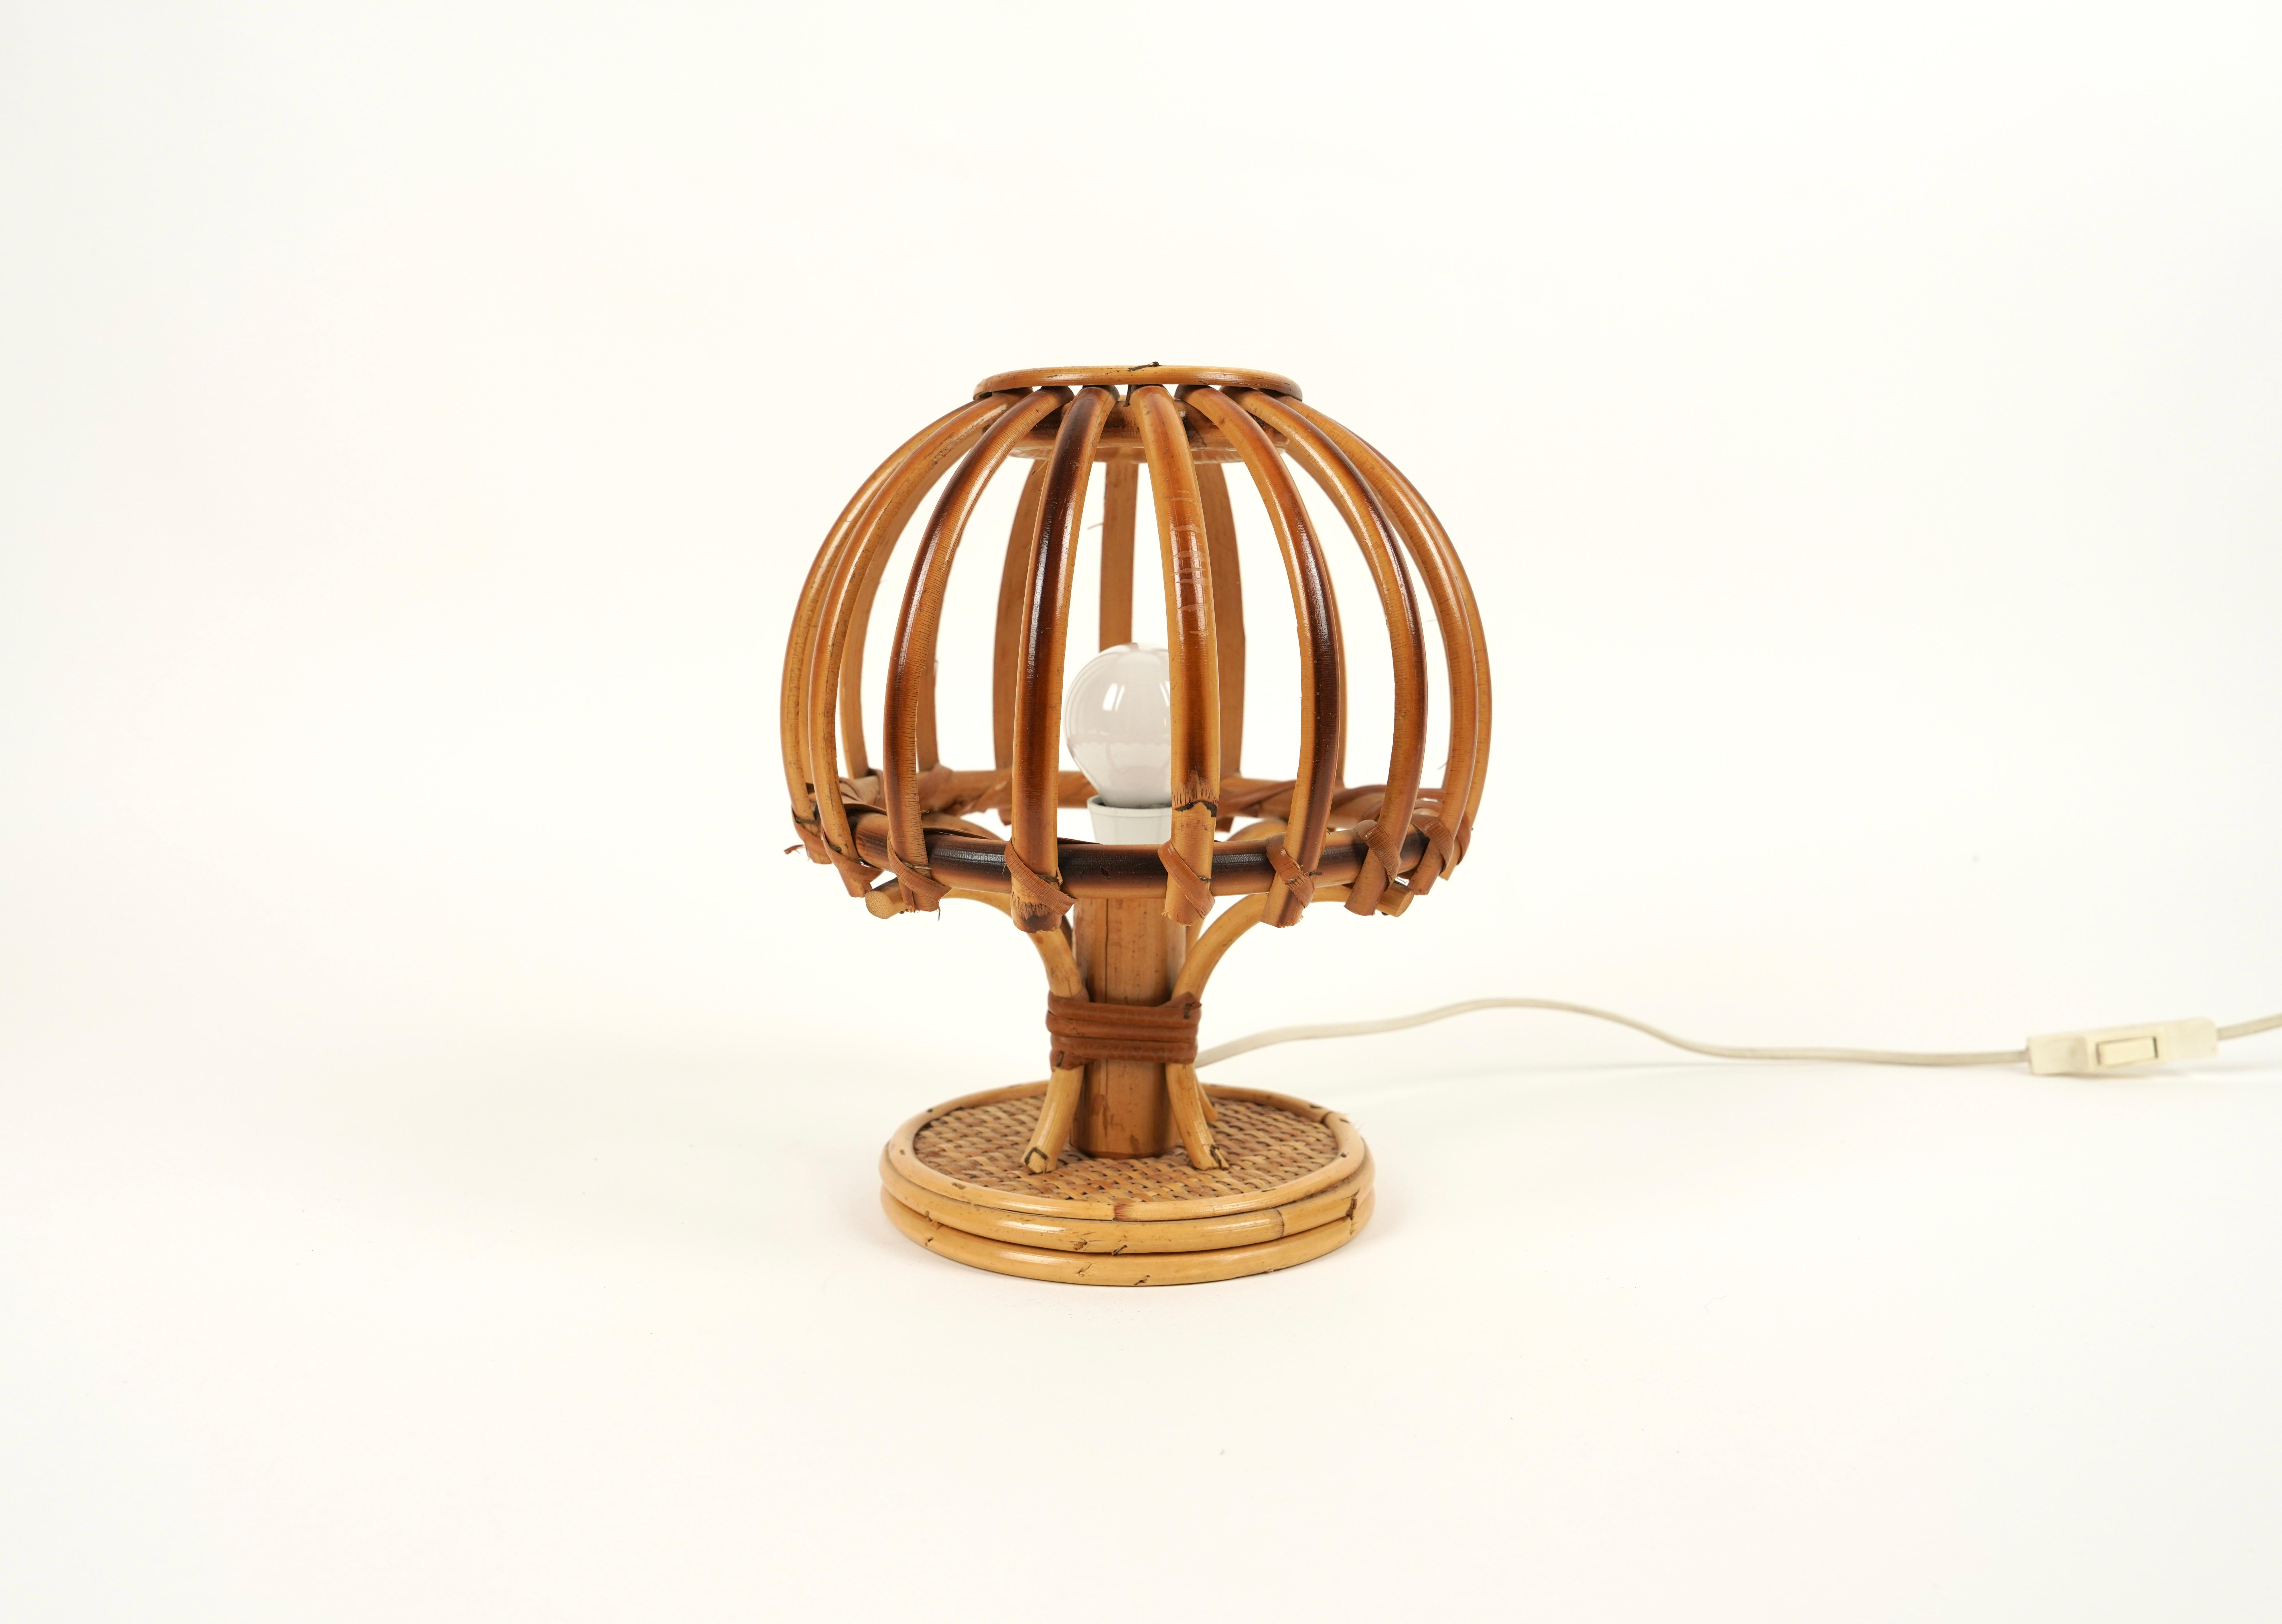 Midcentury Bamboo and Rattan Pair of Table Lamps Louis Sognot Style Italy, 1970s For Sale 2